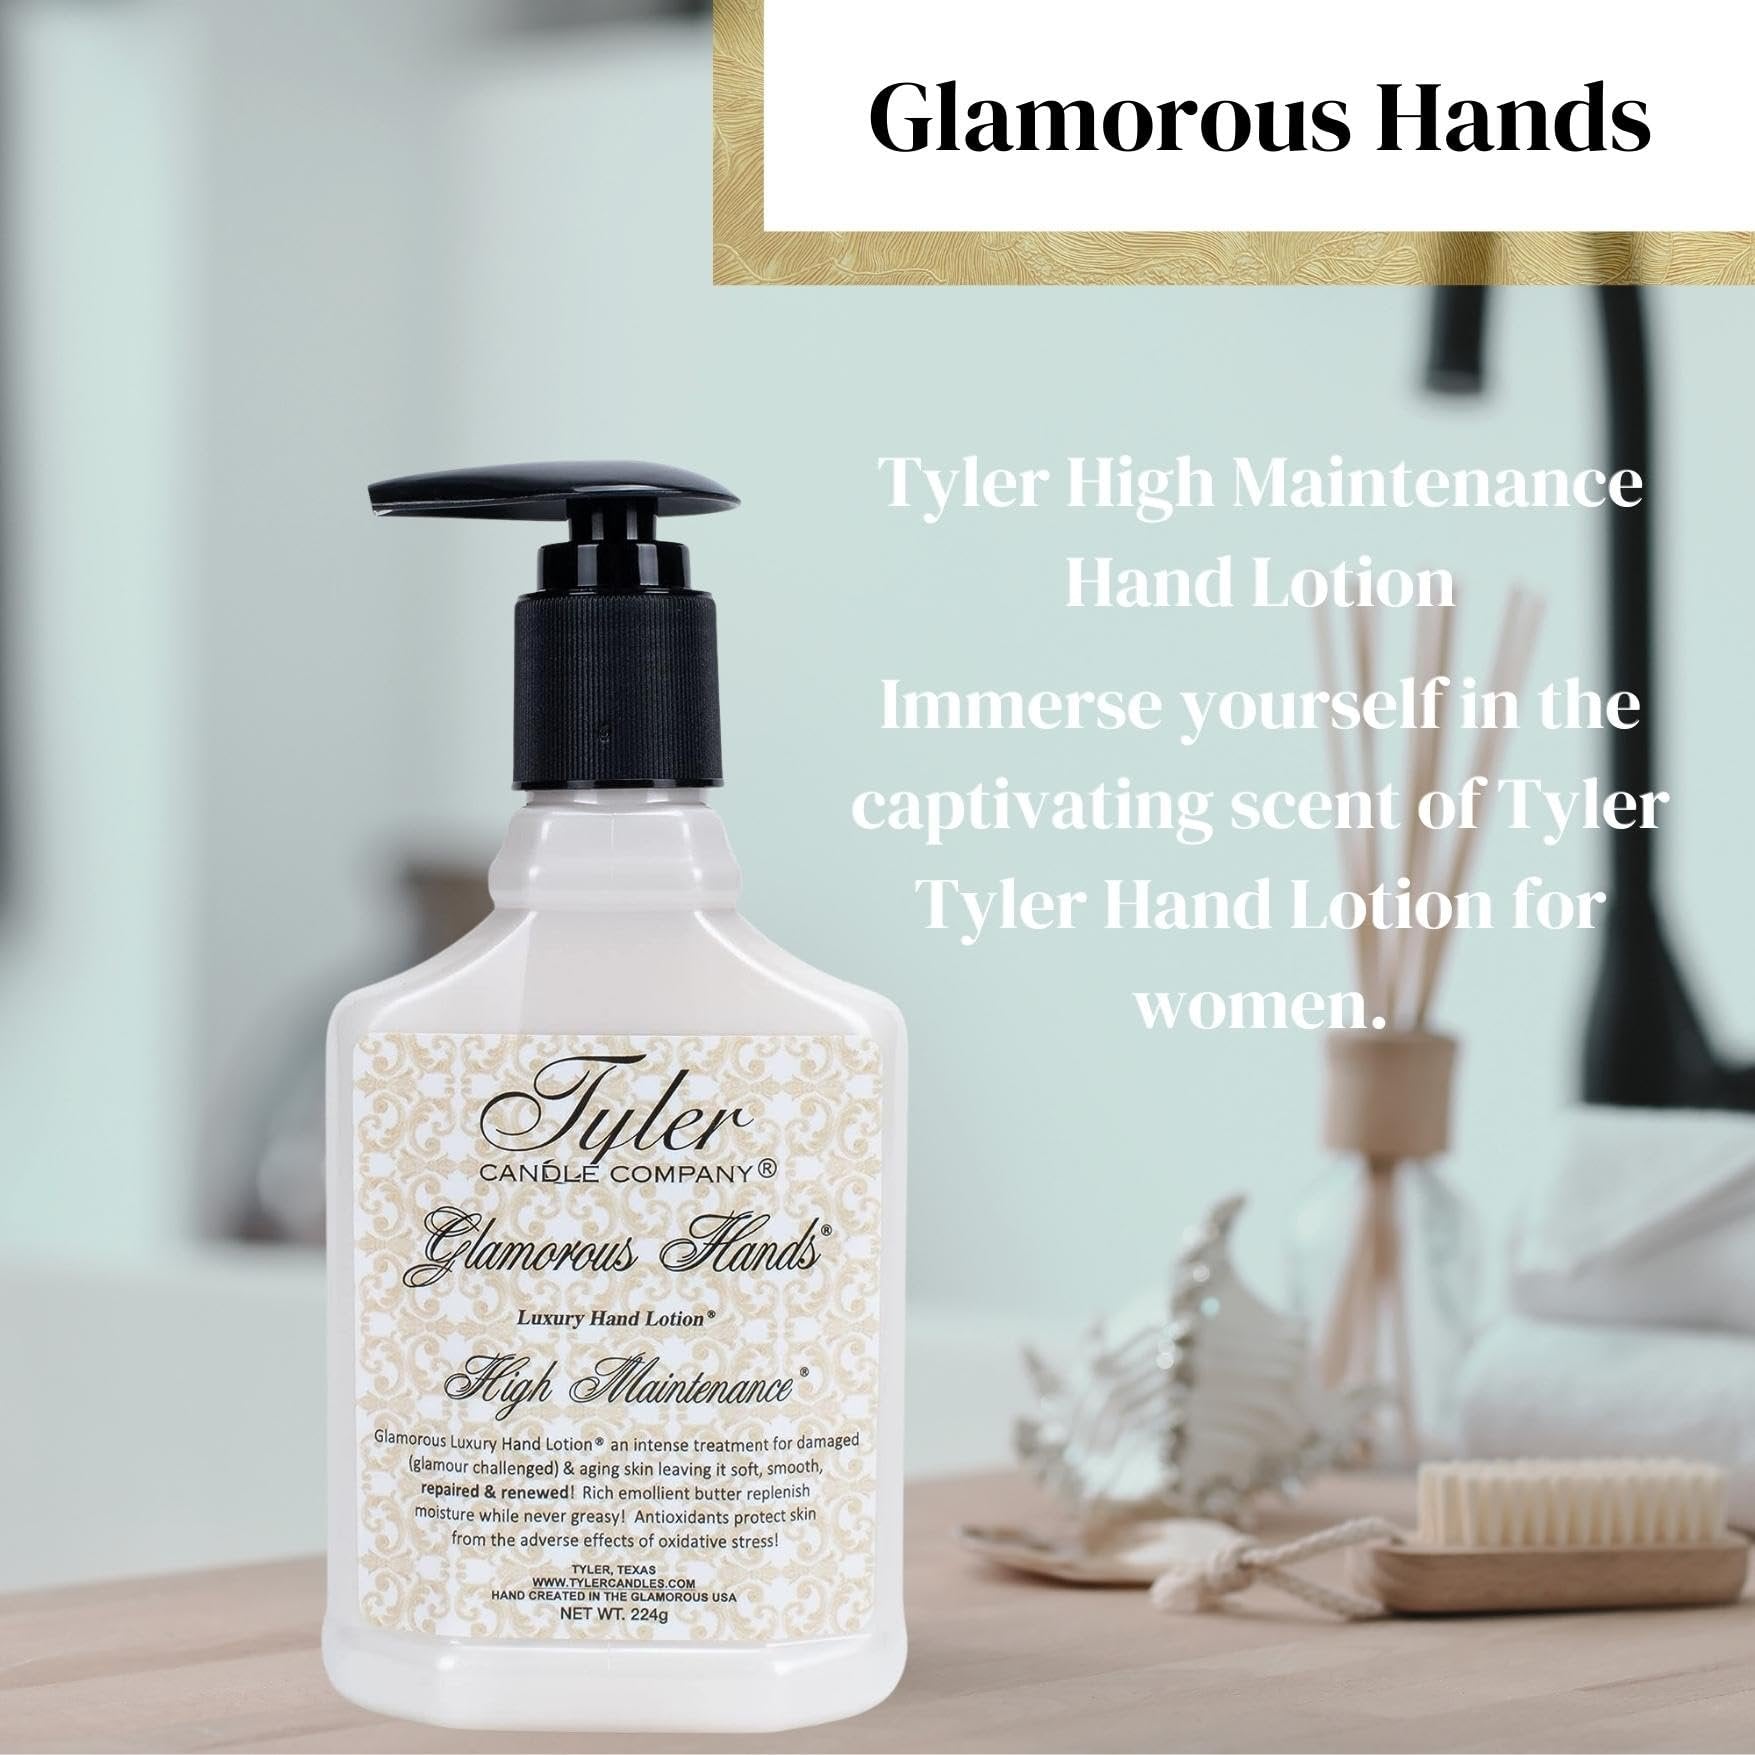 Tyler High Maintenance Hand Lotion - Scented and Small Hand Cream For Dry Hands - 8 Oz Travel Size Luxury Hand Moisturizer and Multi-Purpose Key Chain